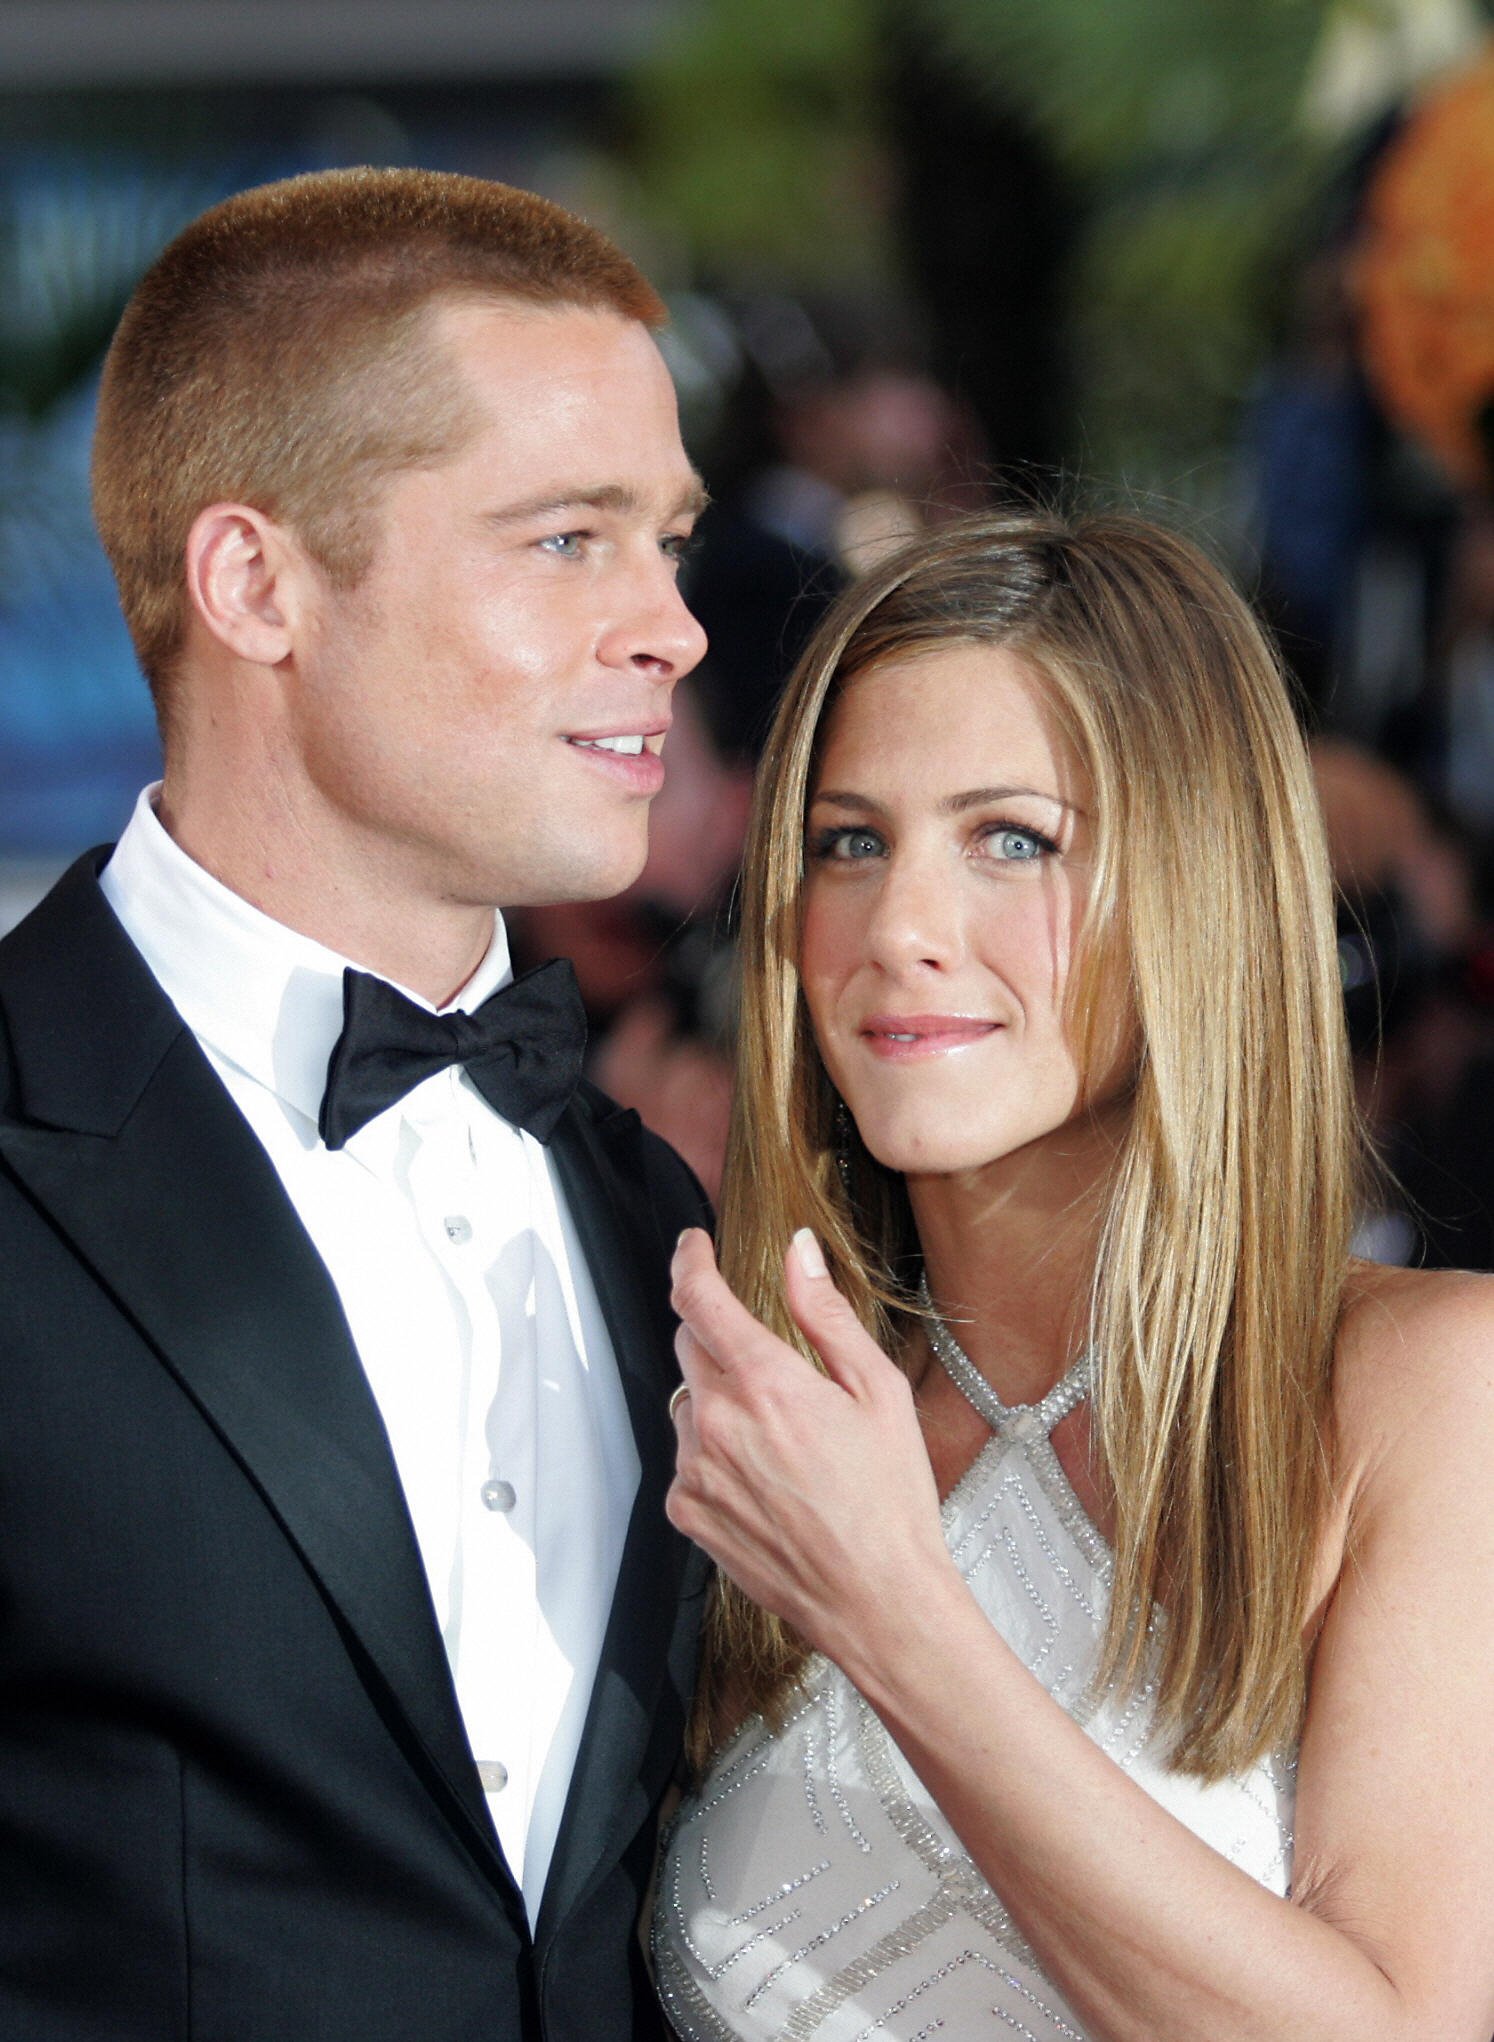 Brad Pitt and his wife Jennifer Aniston attend the official projection of the film "Troy" at the 57th Cannes Film Festival on May 13, 2004 in the French Riviera town. | Source: Getty Images